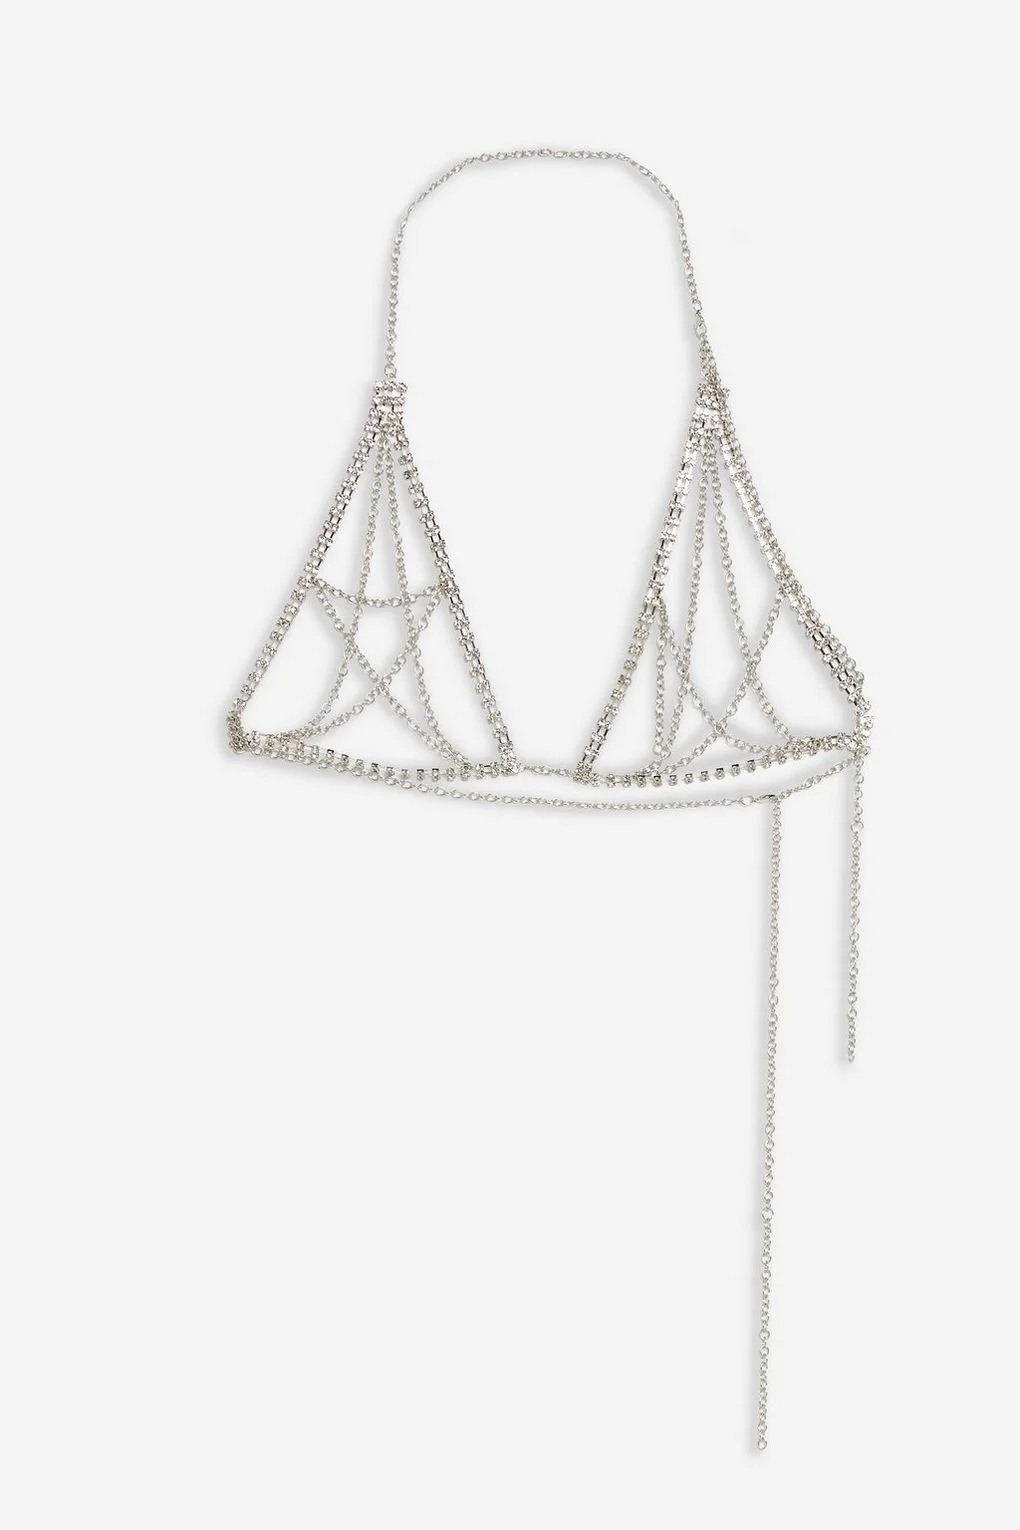 Chasing Daydreams Silver Chain Bralette